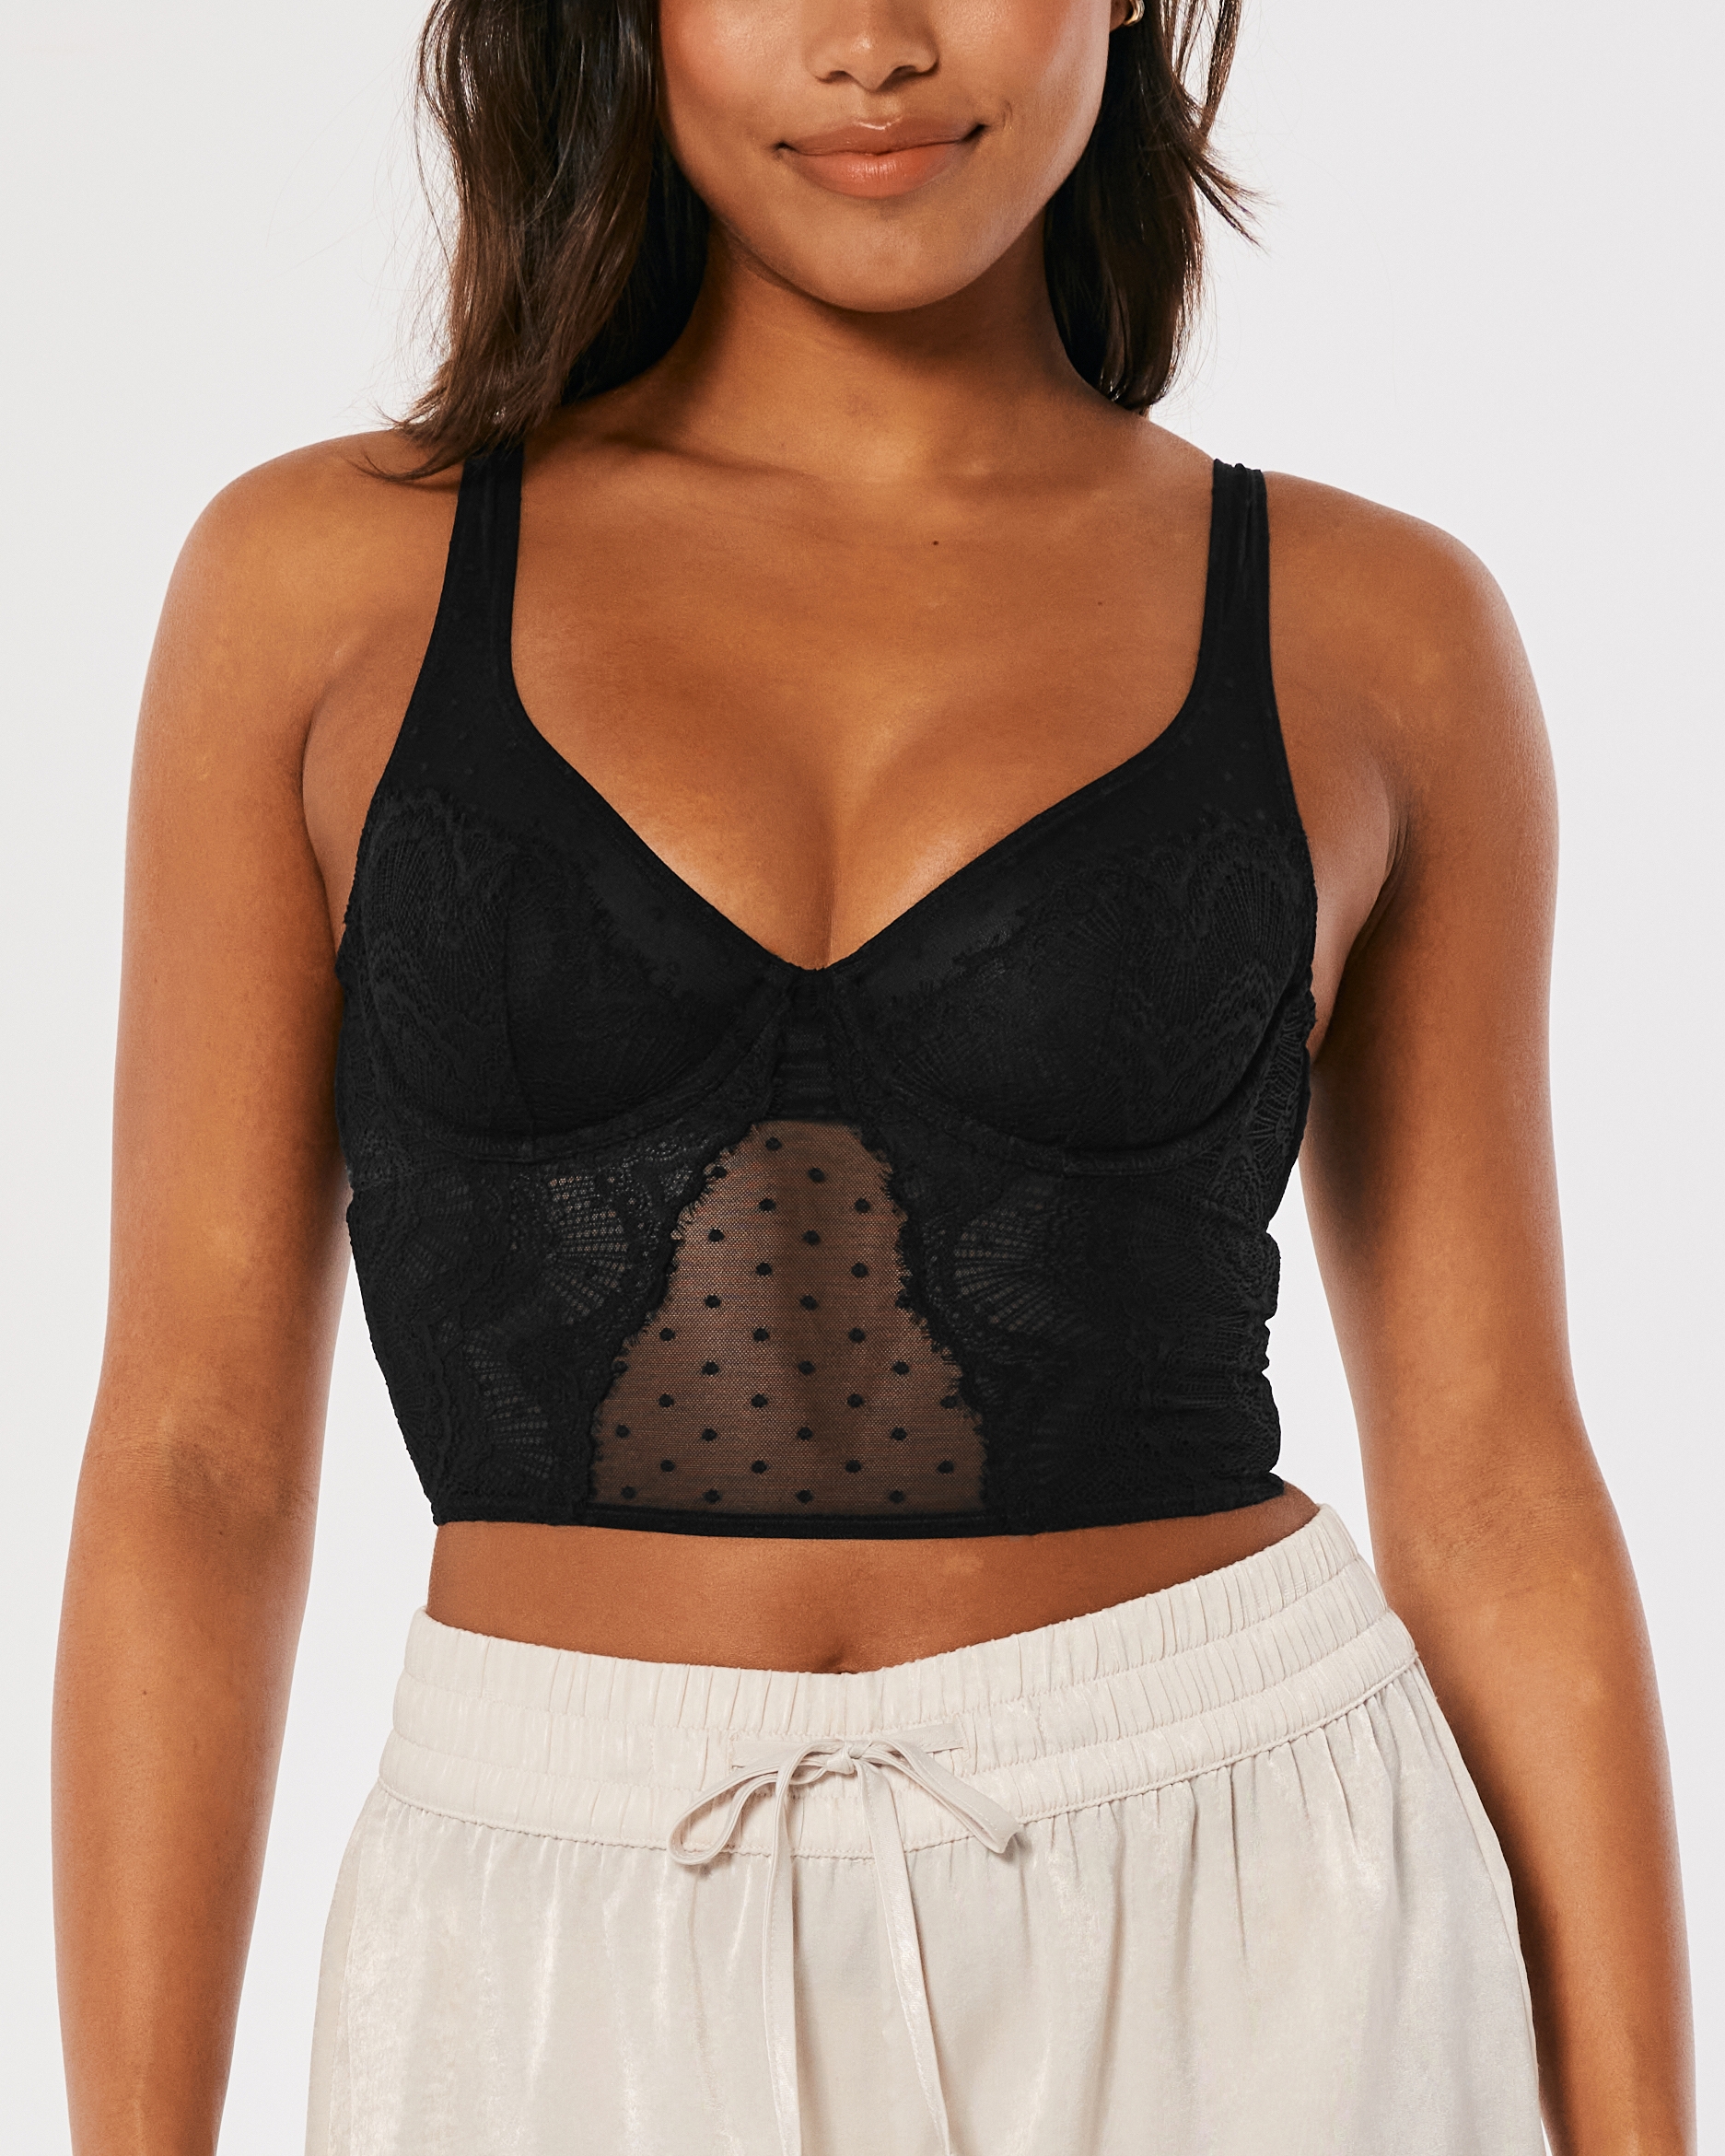 Gilly Hicks lace scoop bra in black